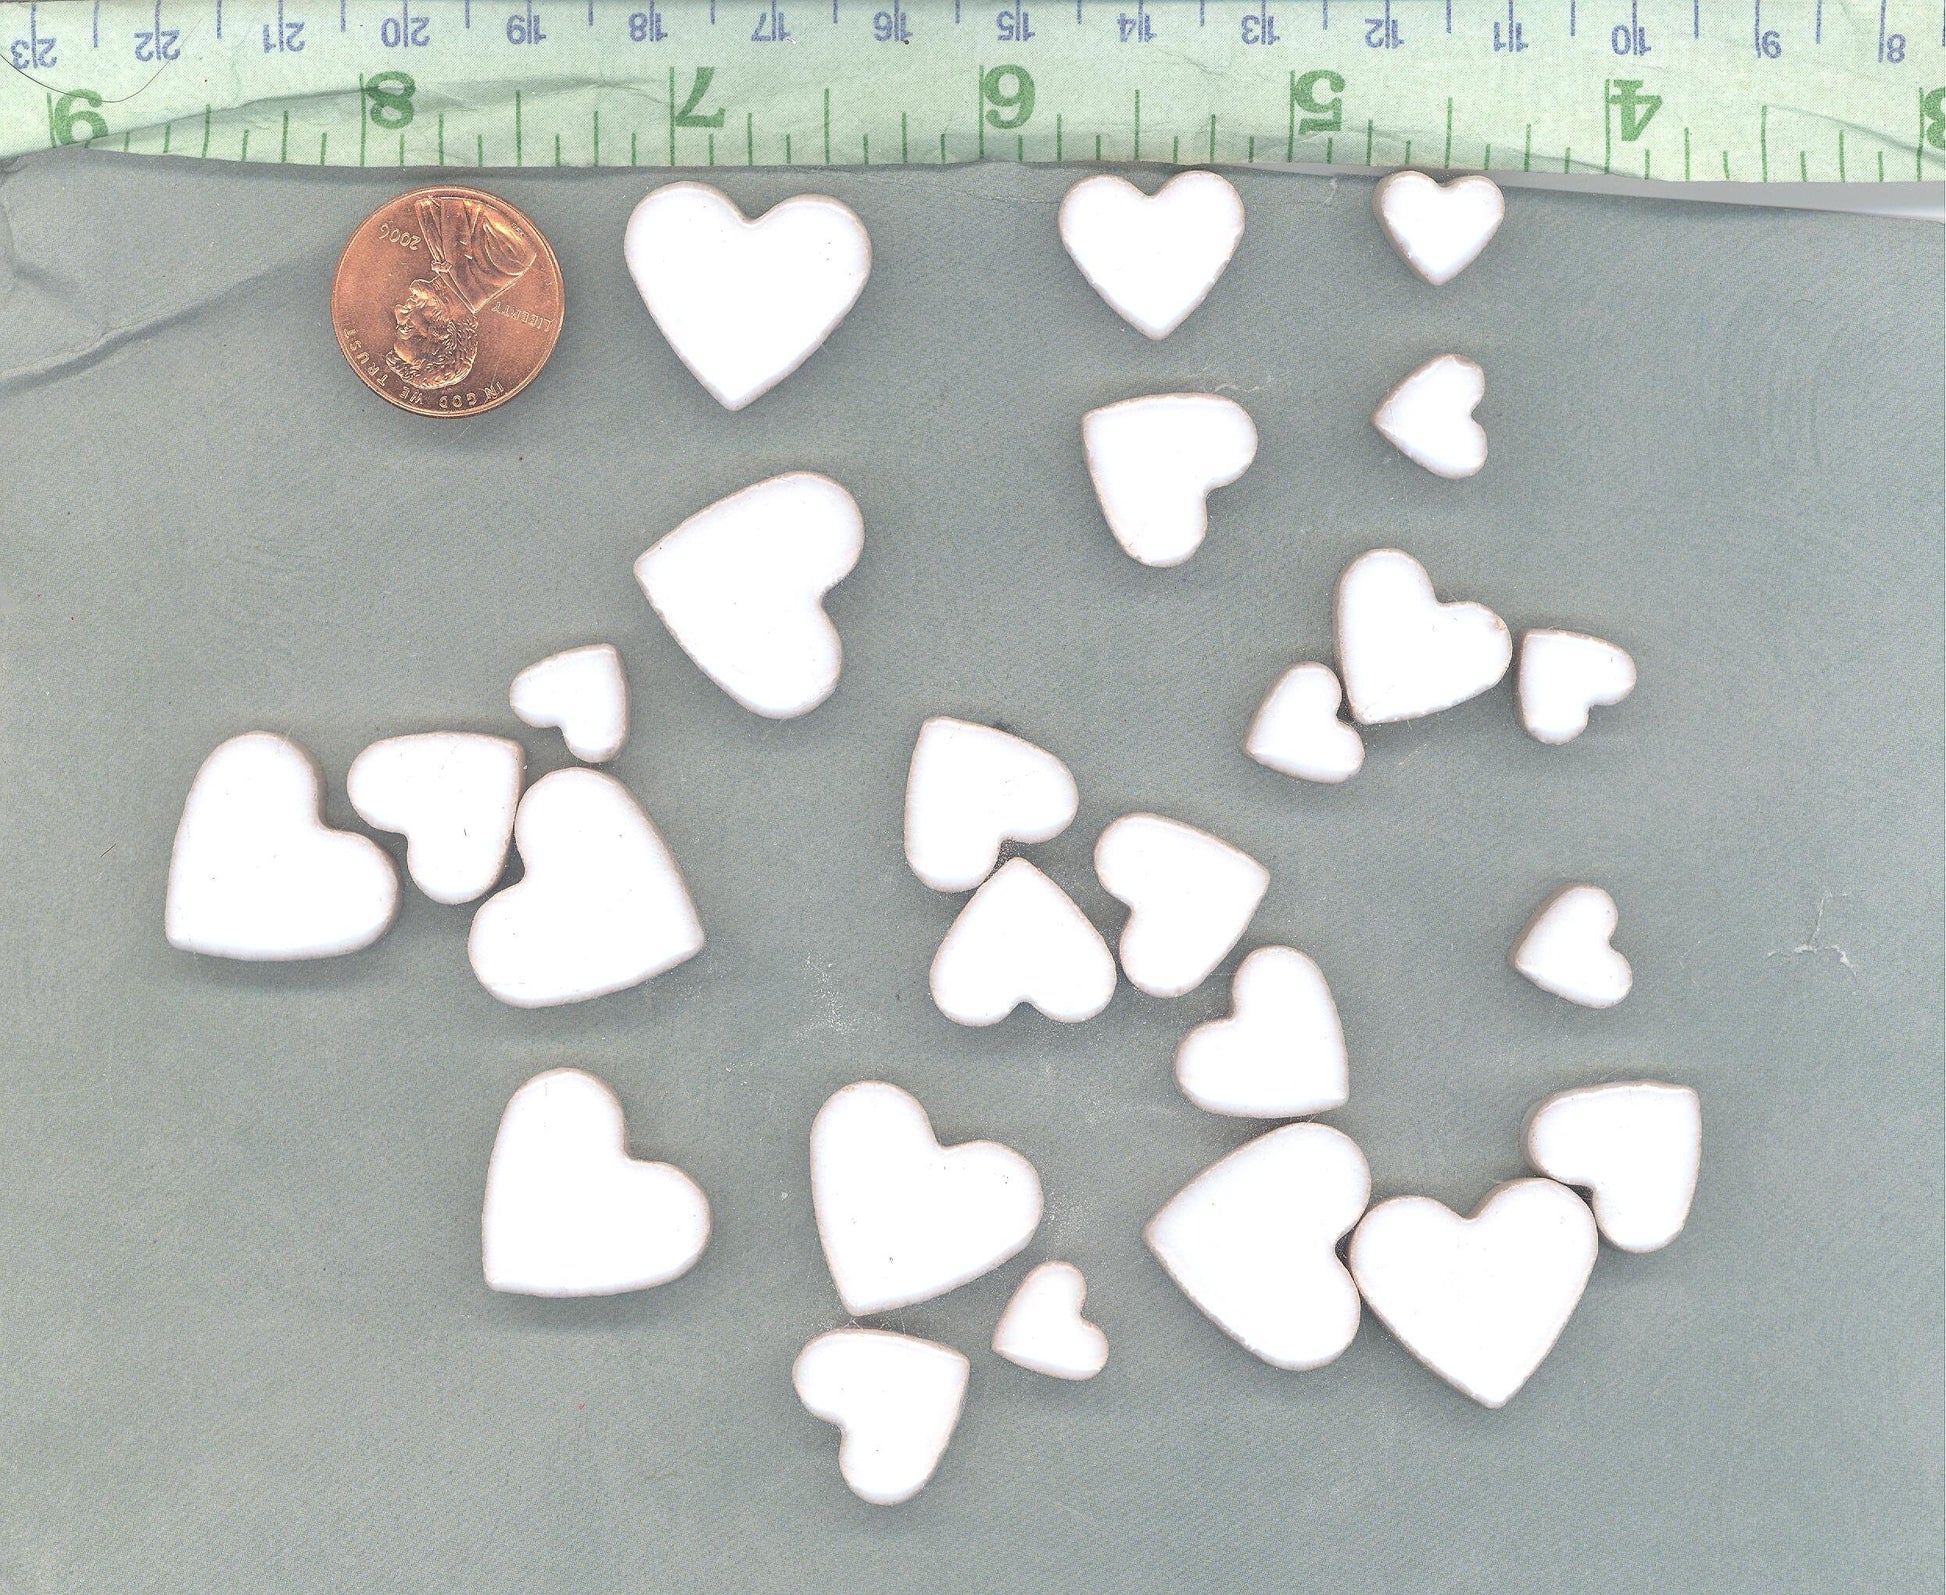 White Hearts Mosaic Tiles - 50g Ceramic in Mix of 3 Sizes - 20mm, 15mm, 10mm